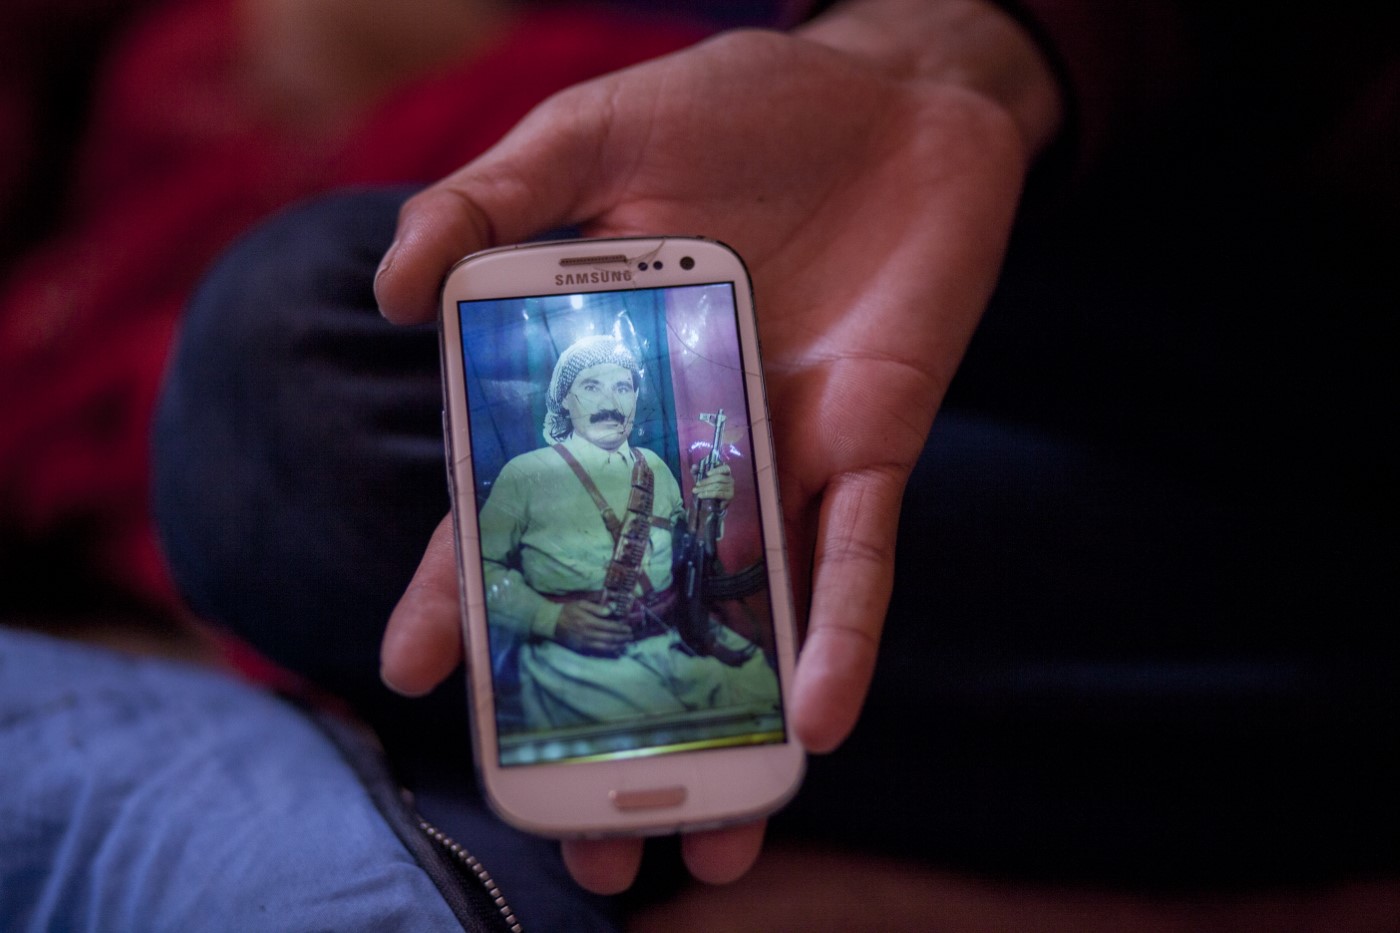 Baxtyar, a young Kurdish Iraqi refugee who had been a Peshmerga fighter against the IS, shows a photograph of his father (also Peshmerga) on his mobile phone. Refugee camp "Jungle", Dunkirk, France. May 4, 2016